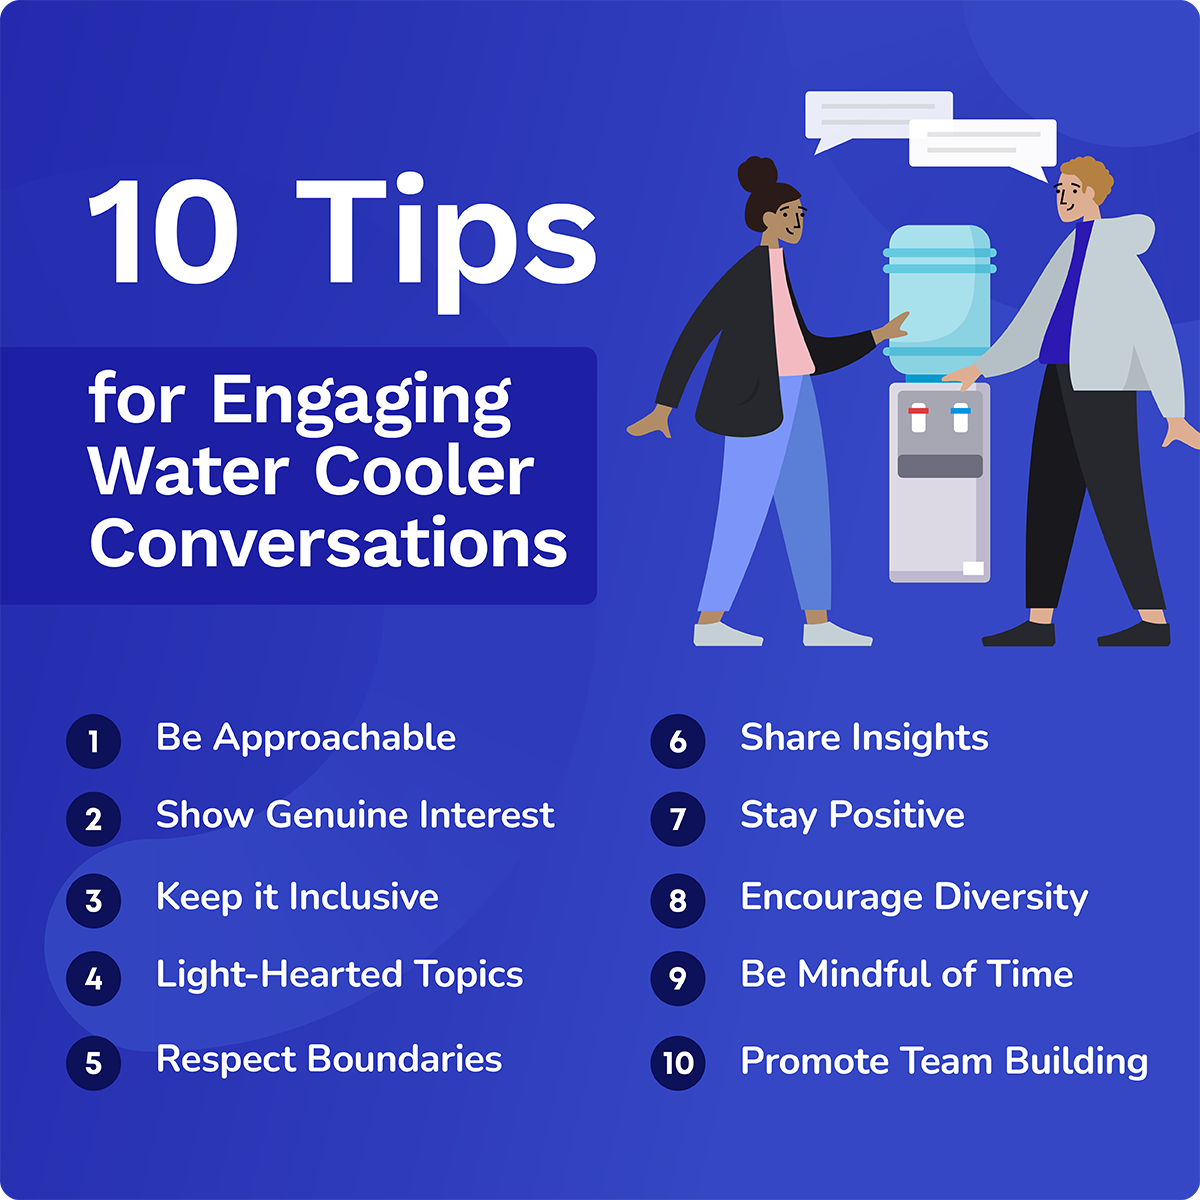 10 tips for engaging water cooler conversations